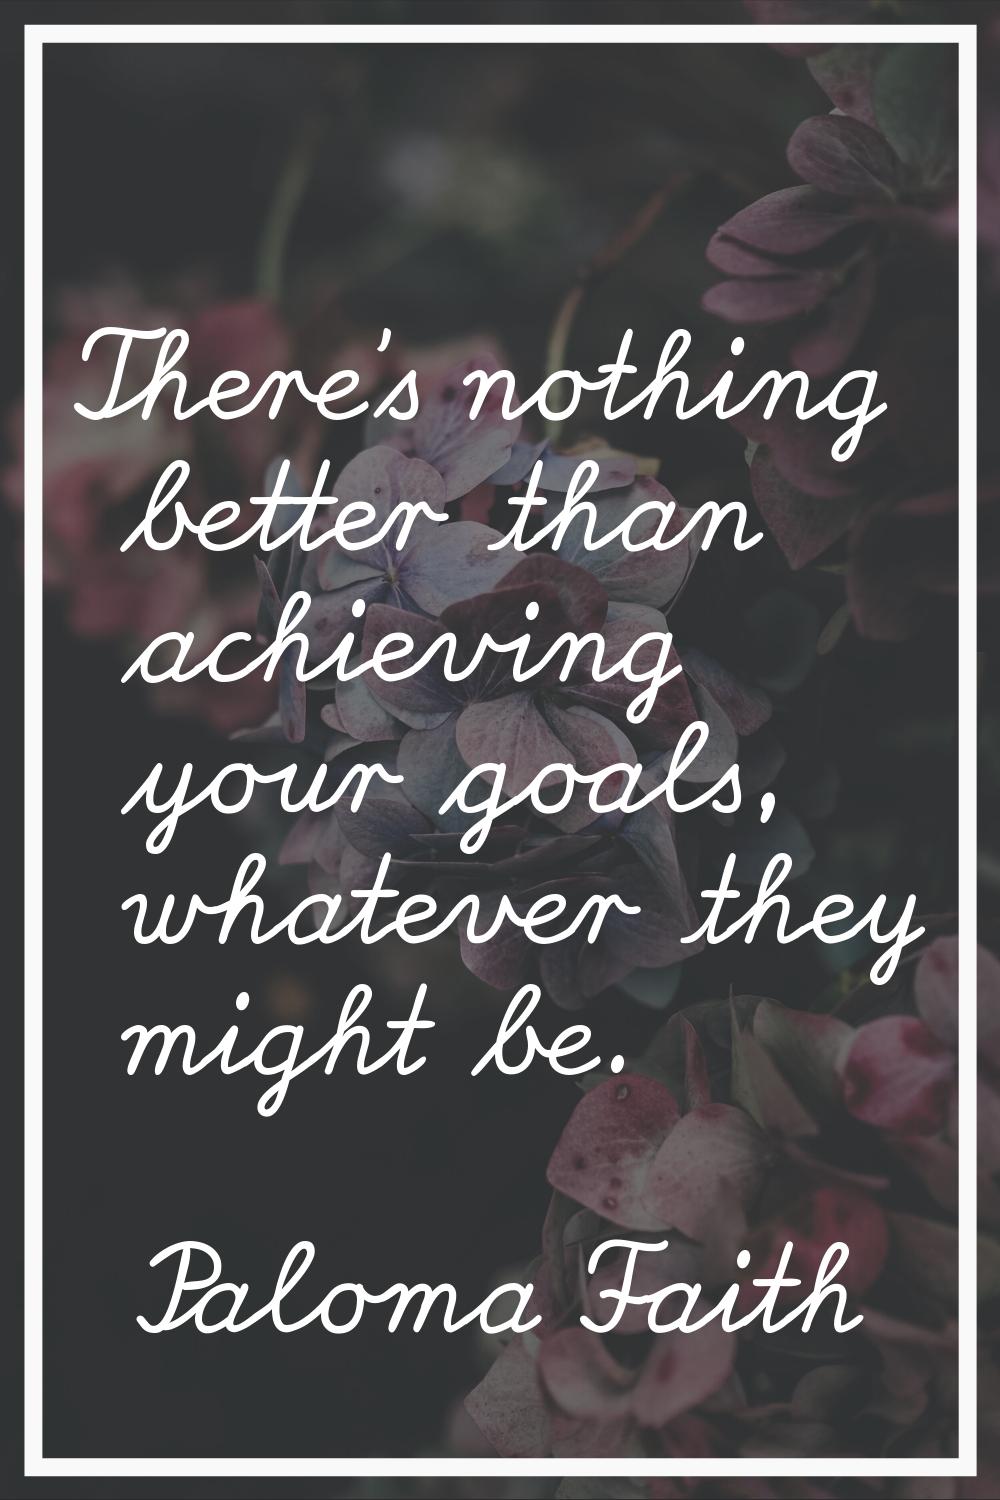 There's nothing better than achieving your goals, whatever they might be.